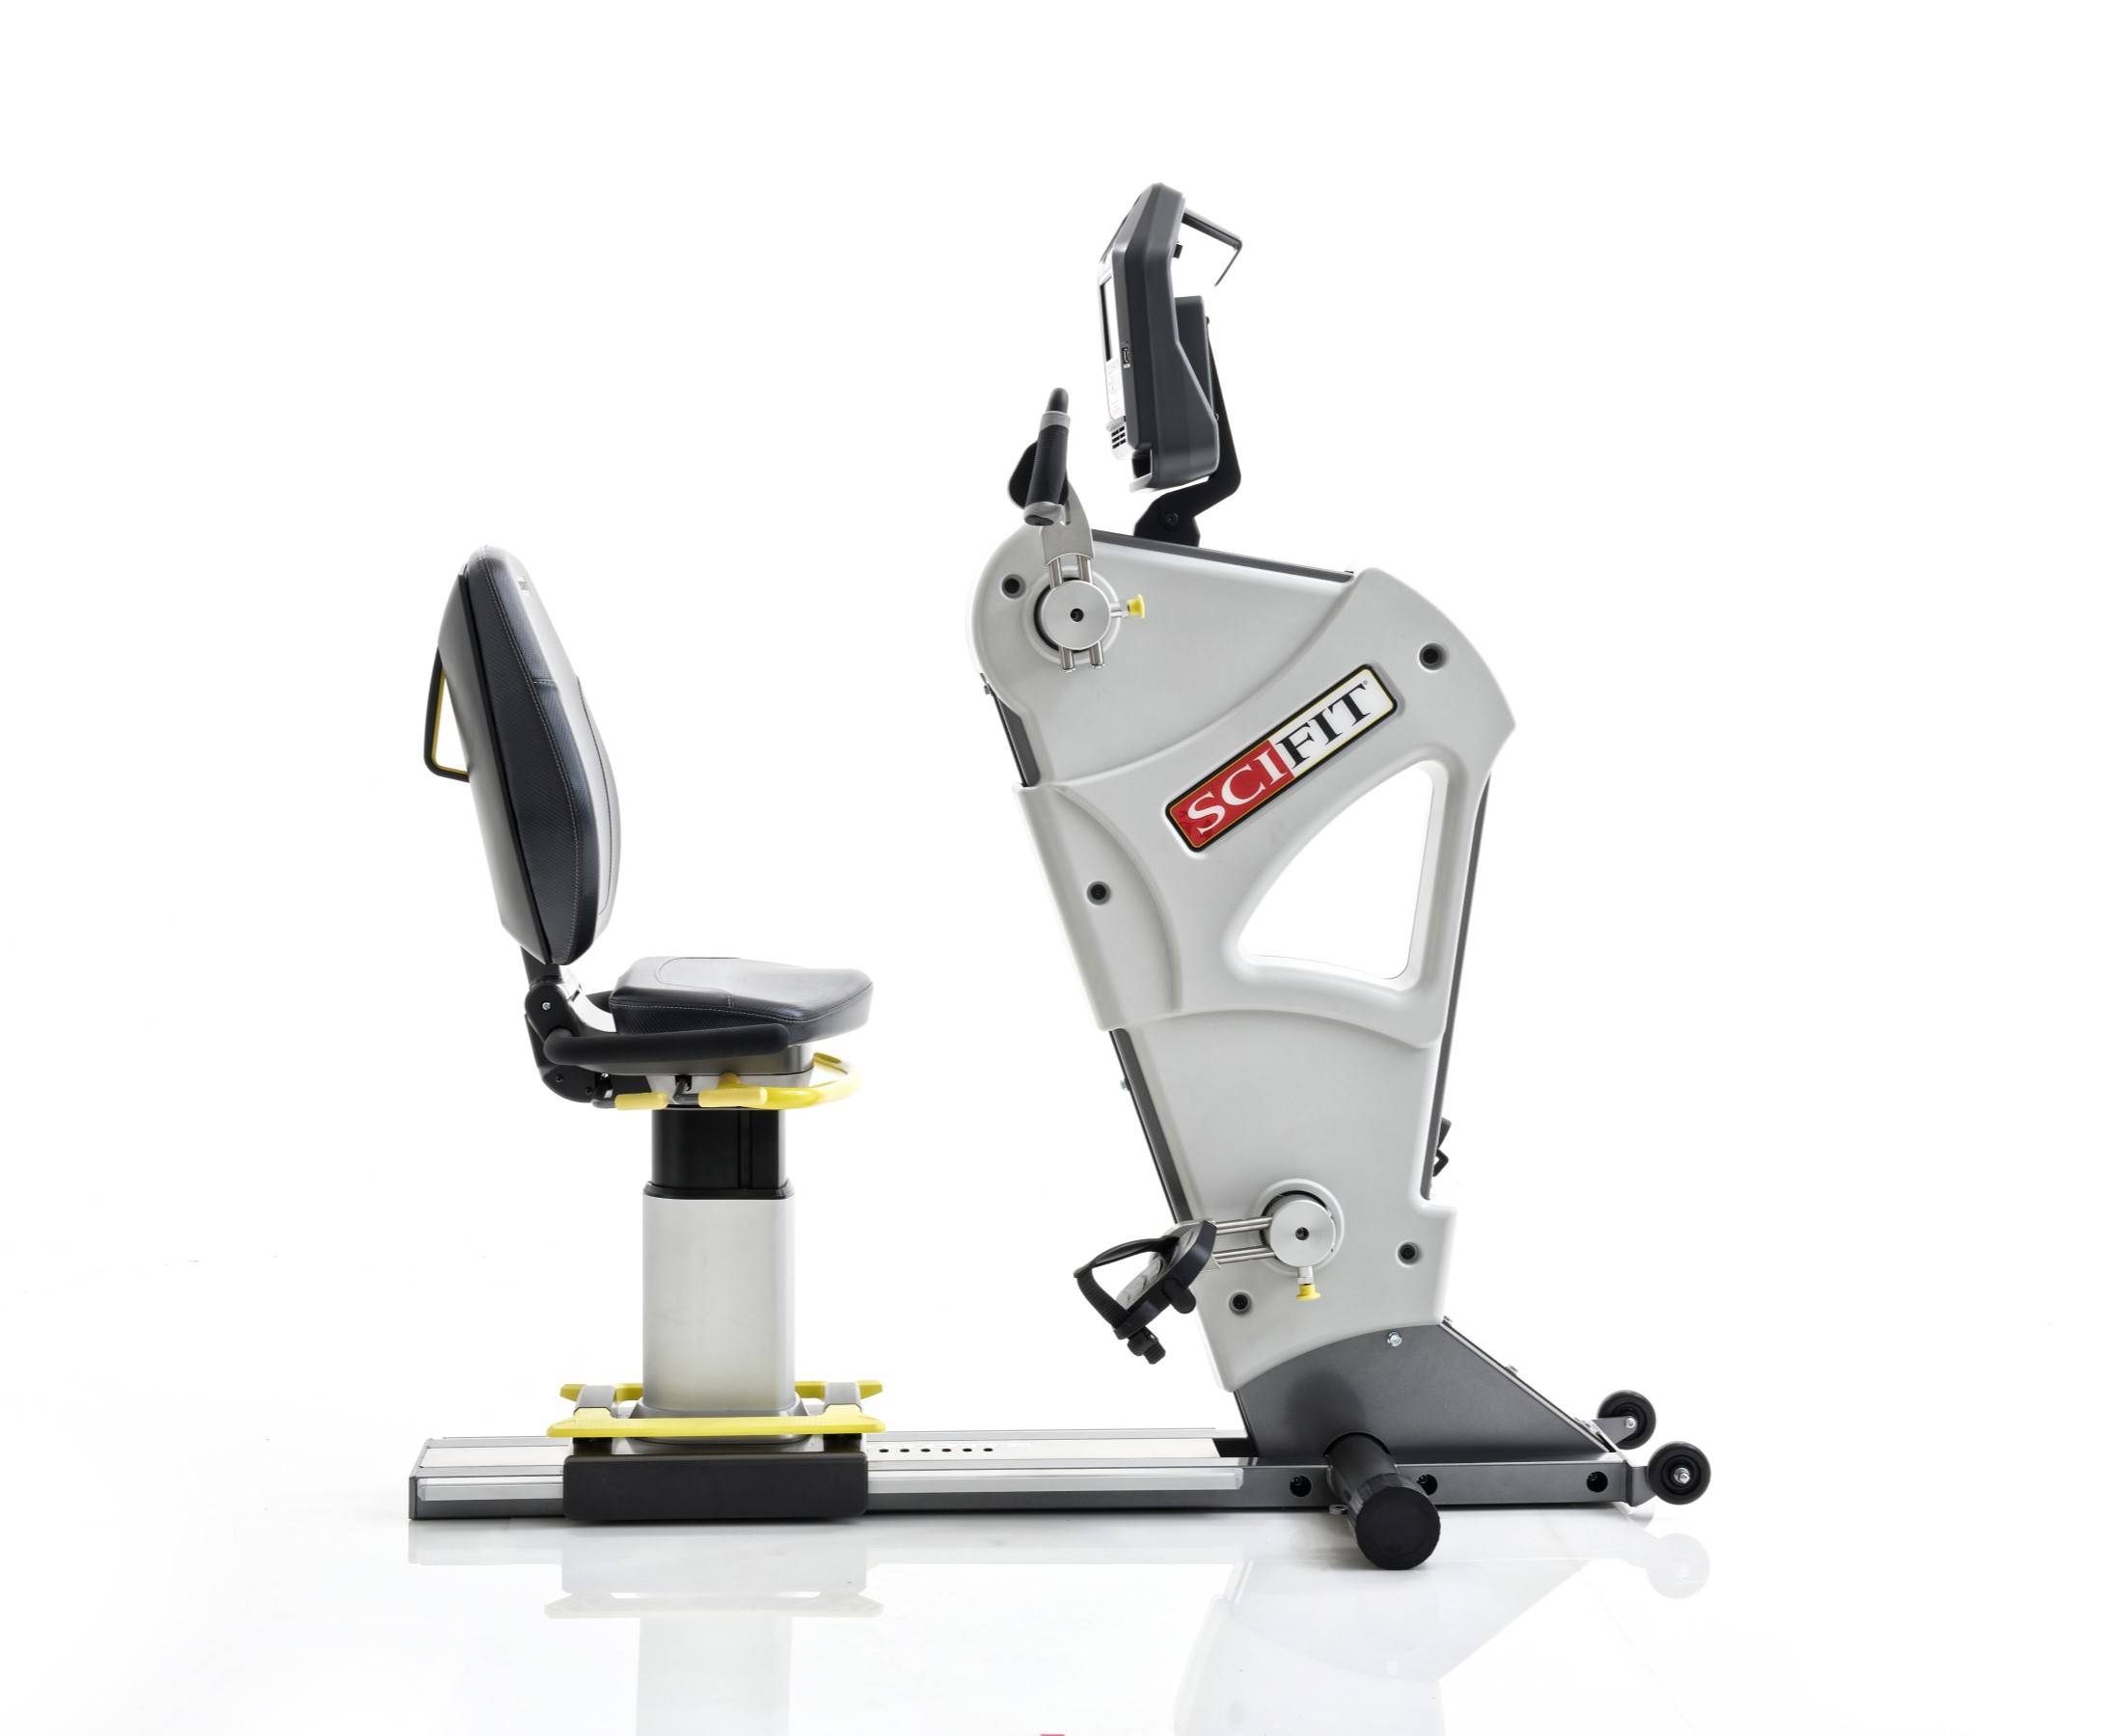 SciFit Pro2 Total Body exercise machine, side profile